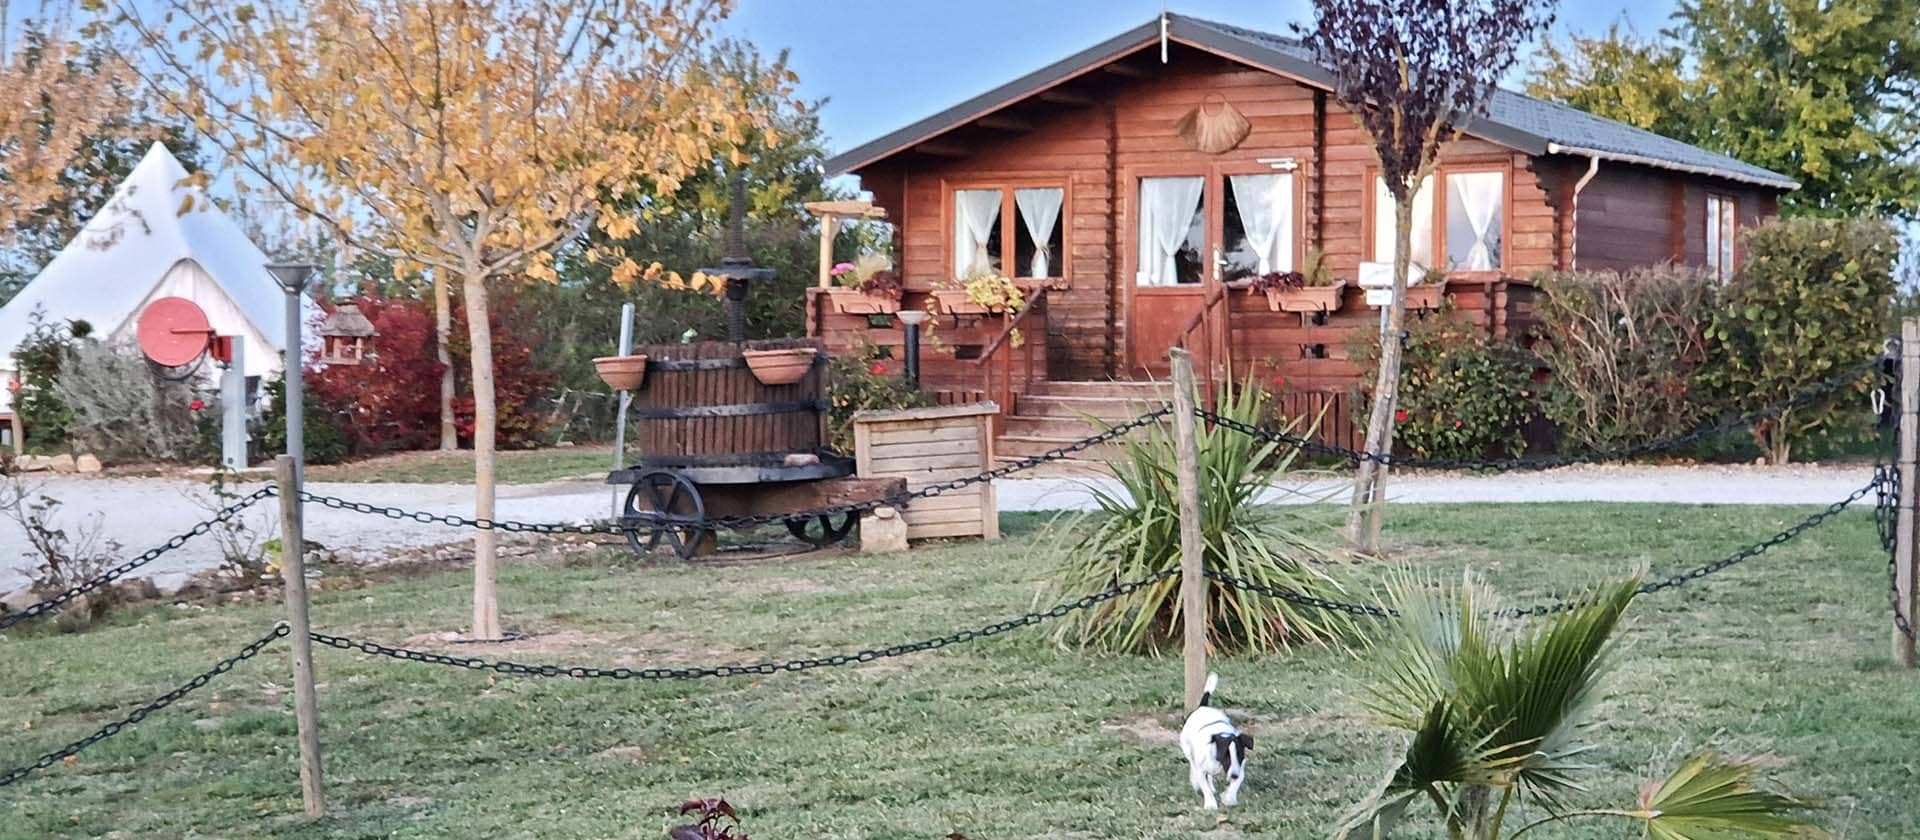 L'Escale Occitane, a campsite near the Canal du Midi, offers you to rent a dormitory chalet